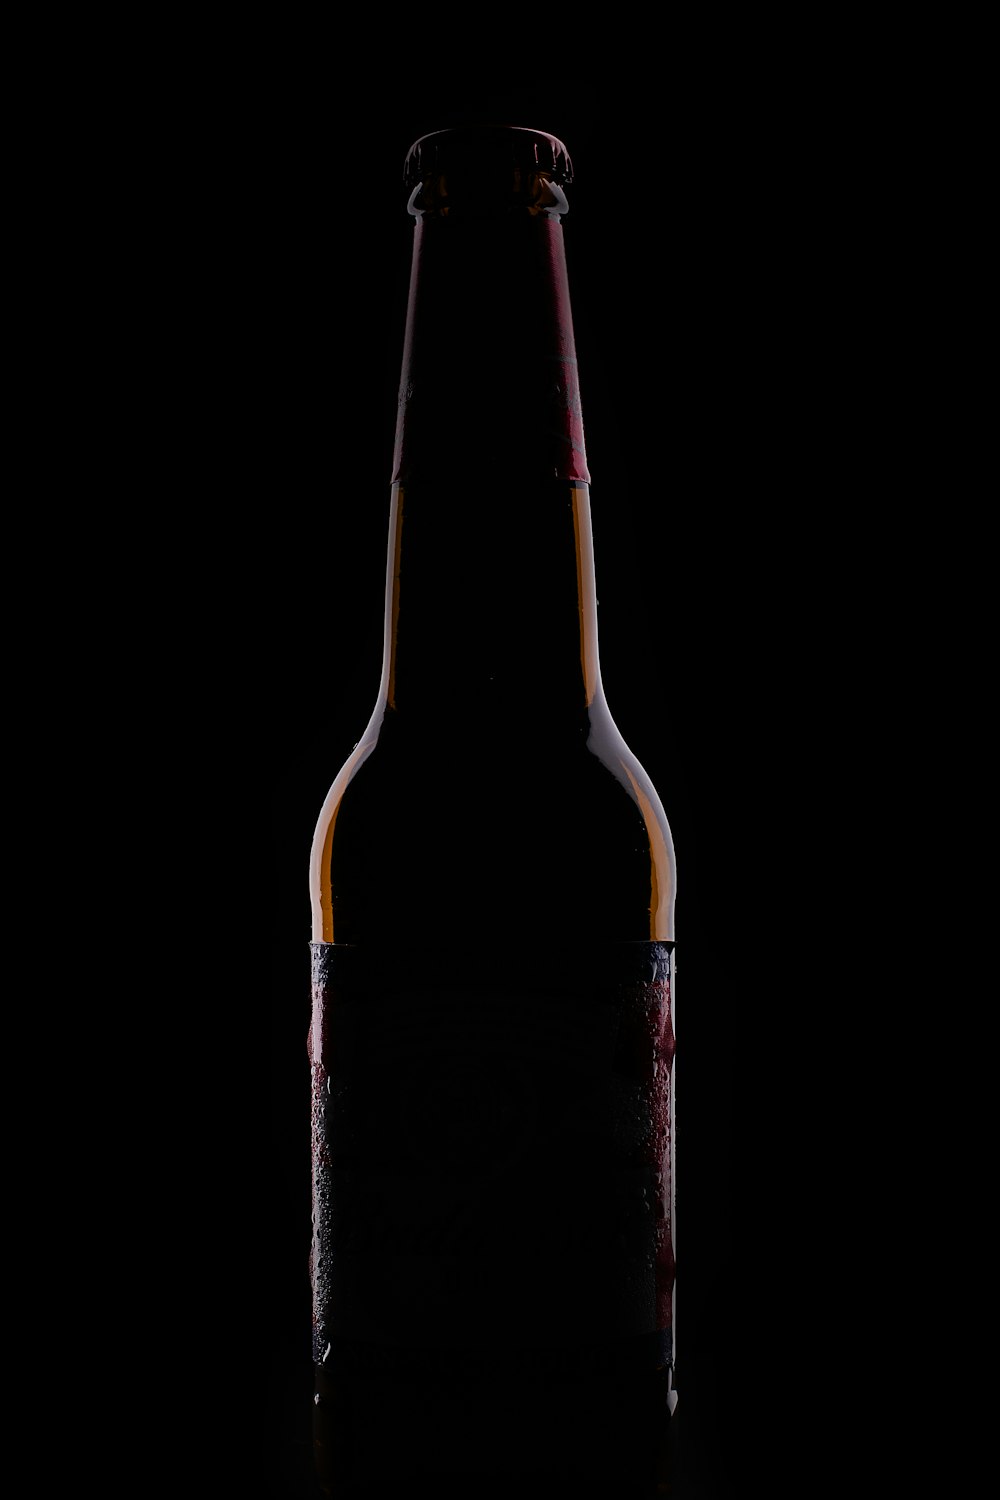 black glass bottle with white background